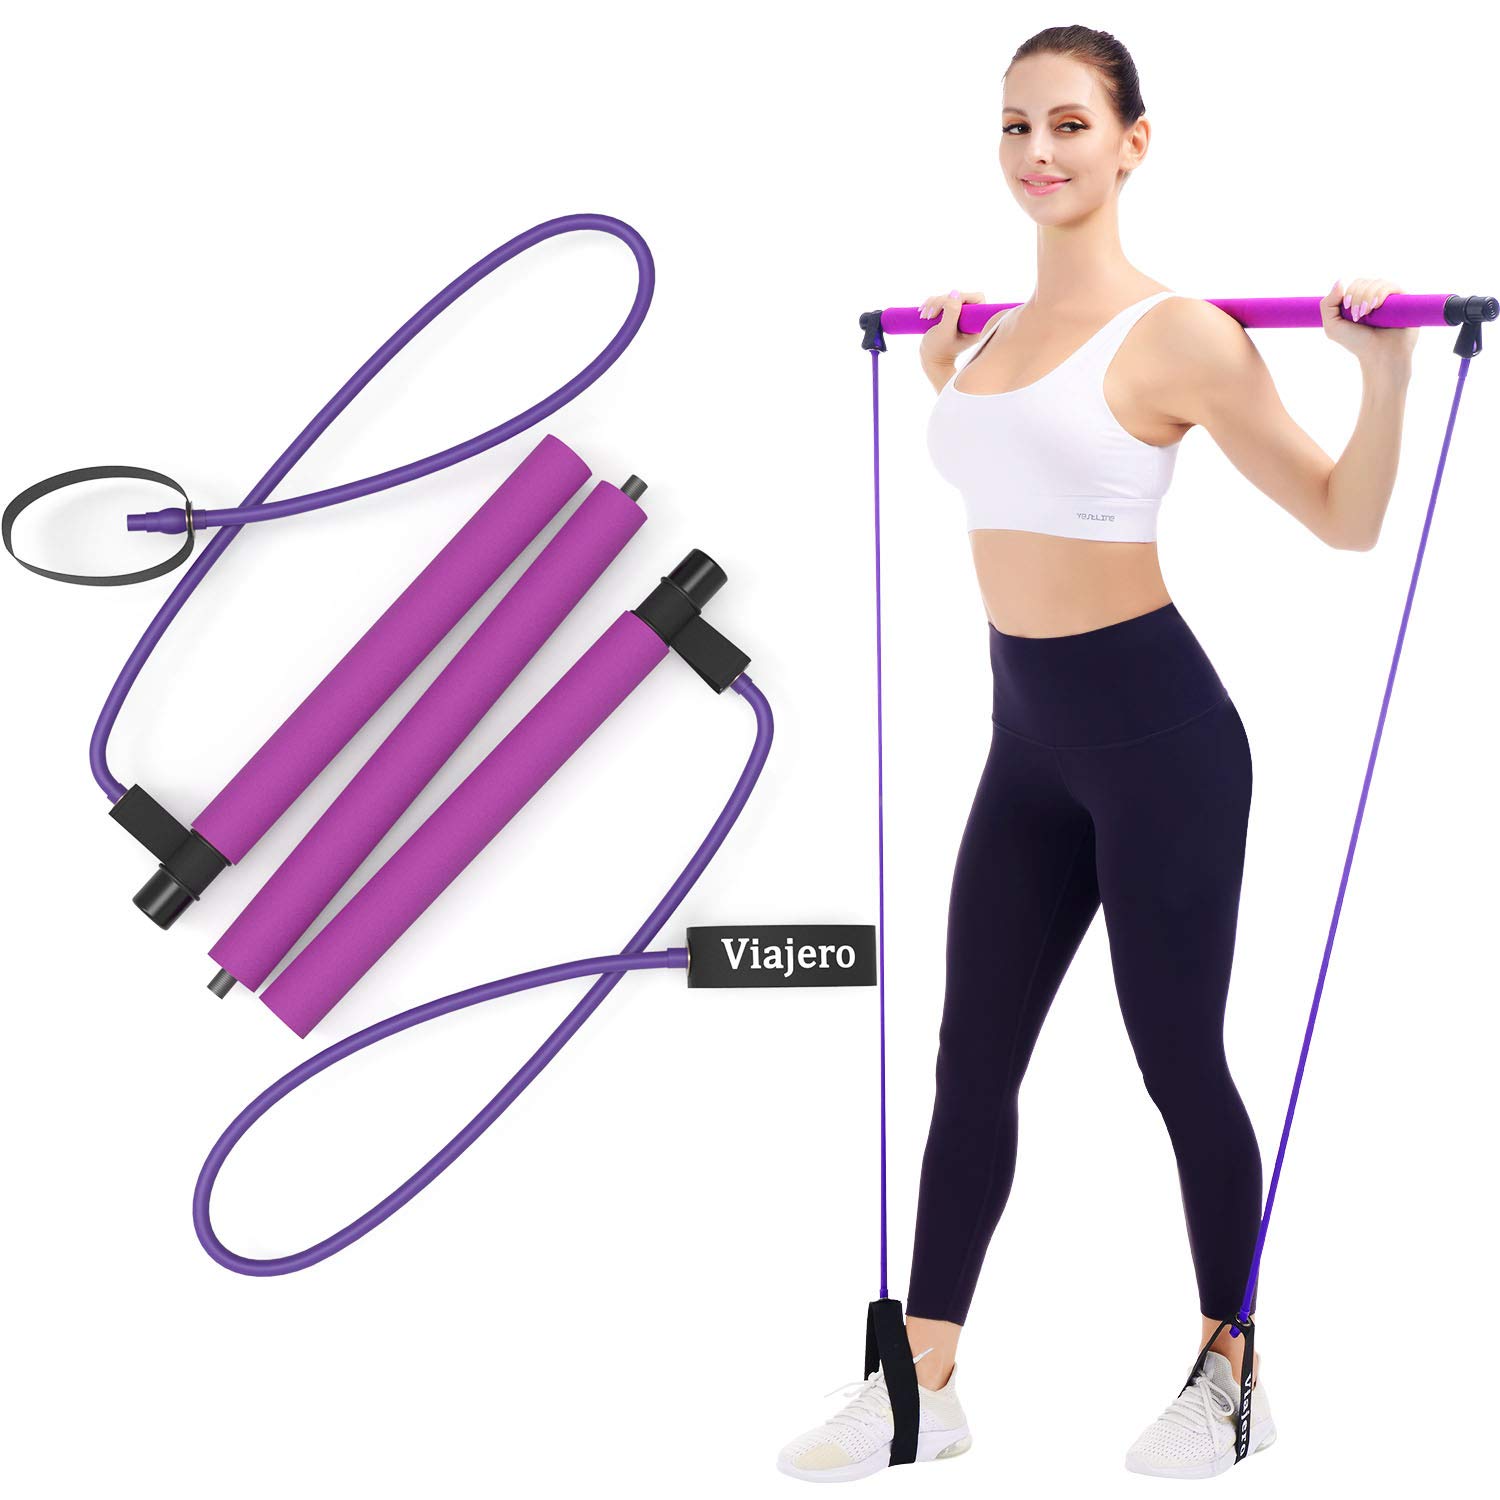 Easy to Assemble Exercise Butt kit Easy to Use Portable Workout Resistance Bands Original Pilates Bar Pilates Equipment bar